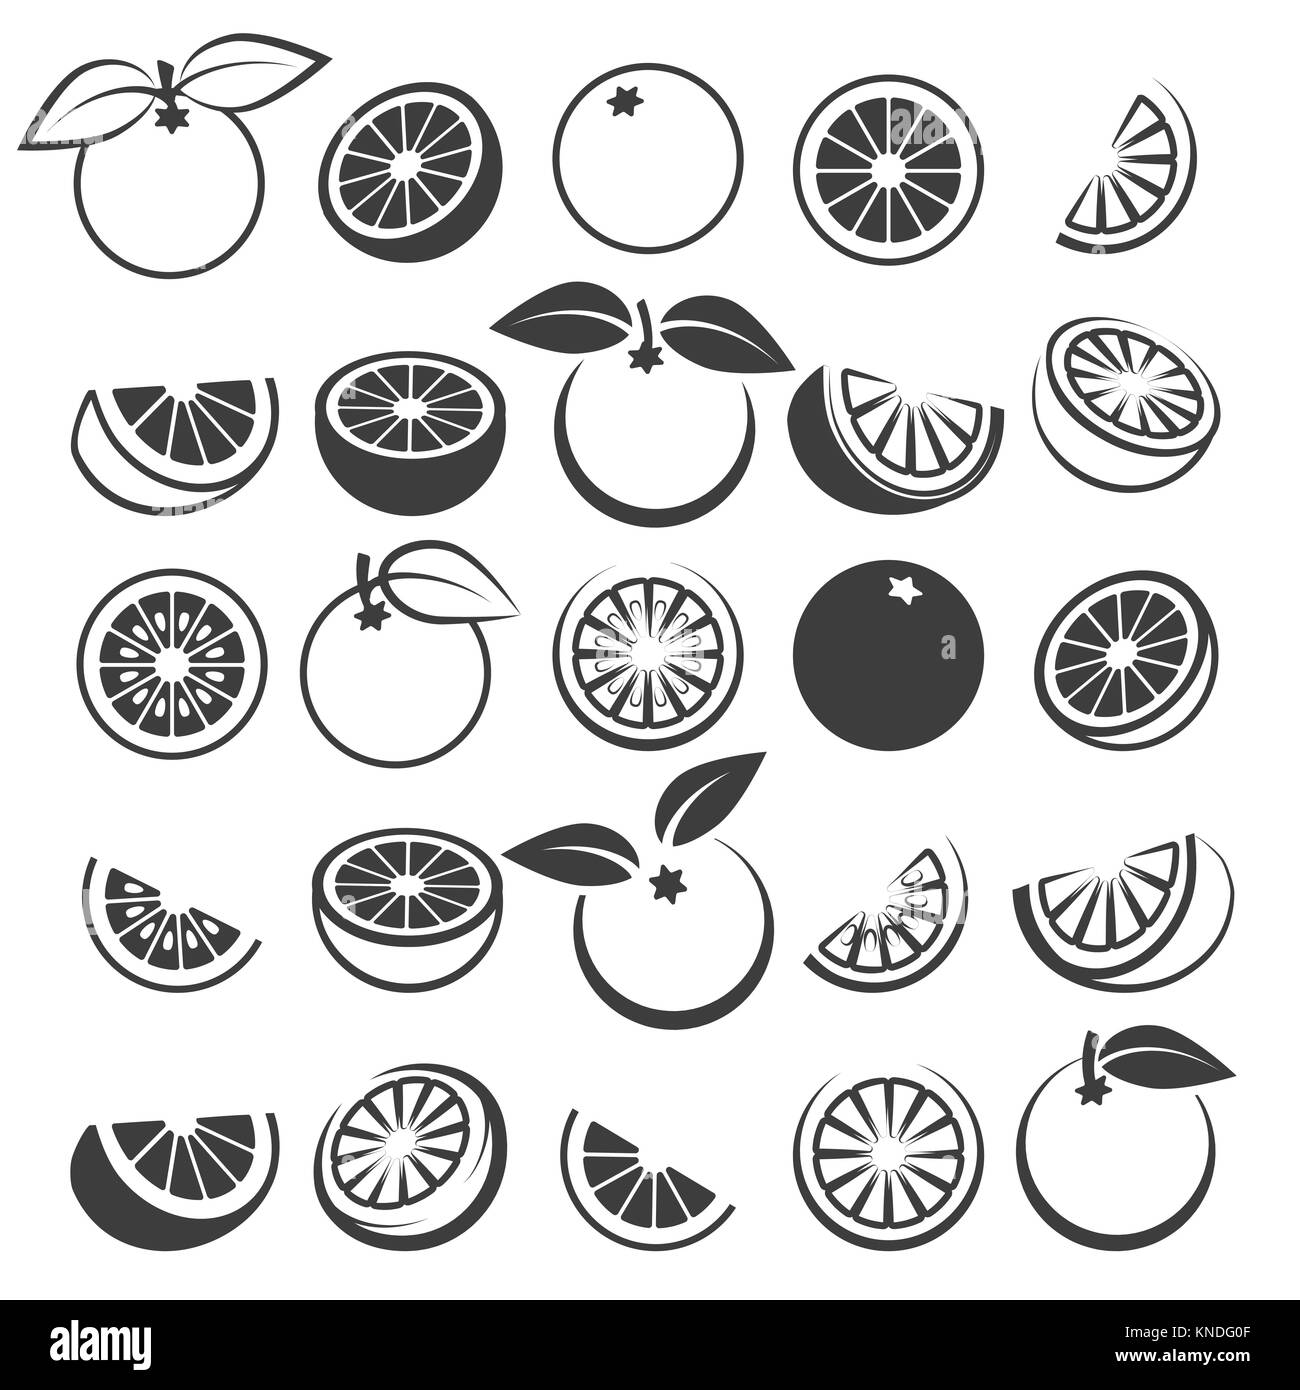 Orange icons. Tasty fresh vector black oranges fruits isolated on white background, citrus wedge, half and slices silhouette set Stock Vector